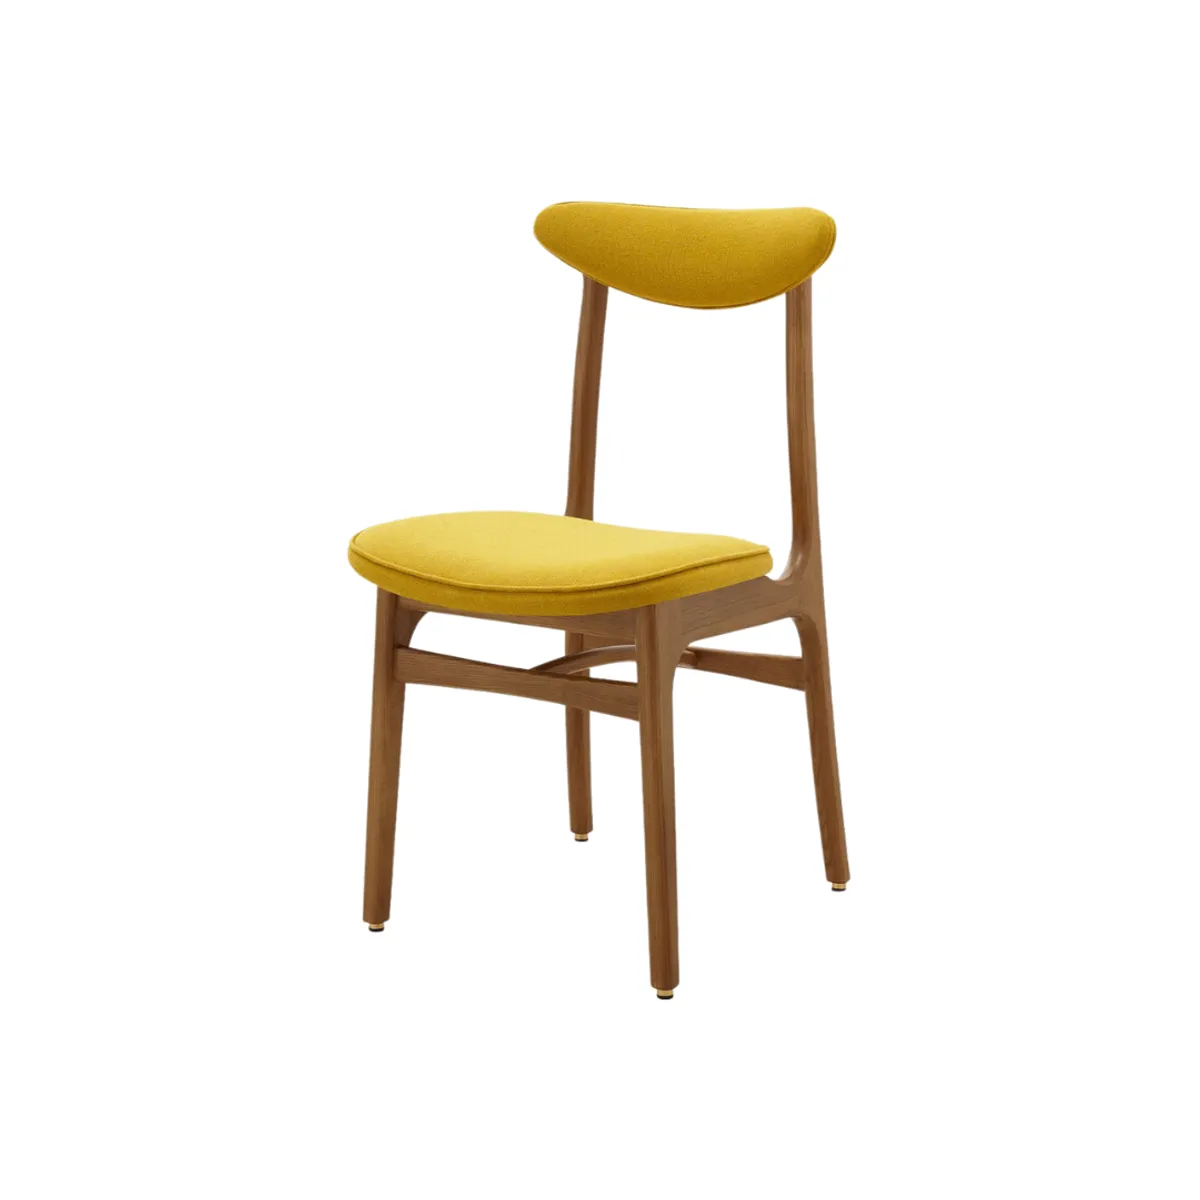 200-190 side chair 3